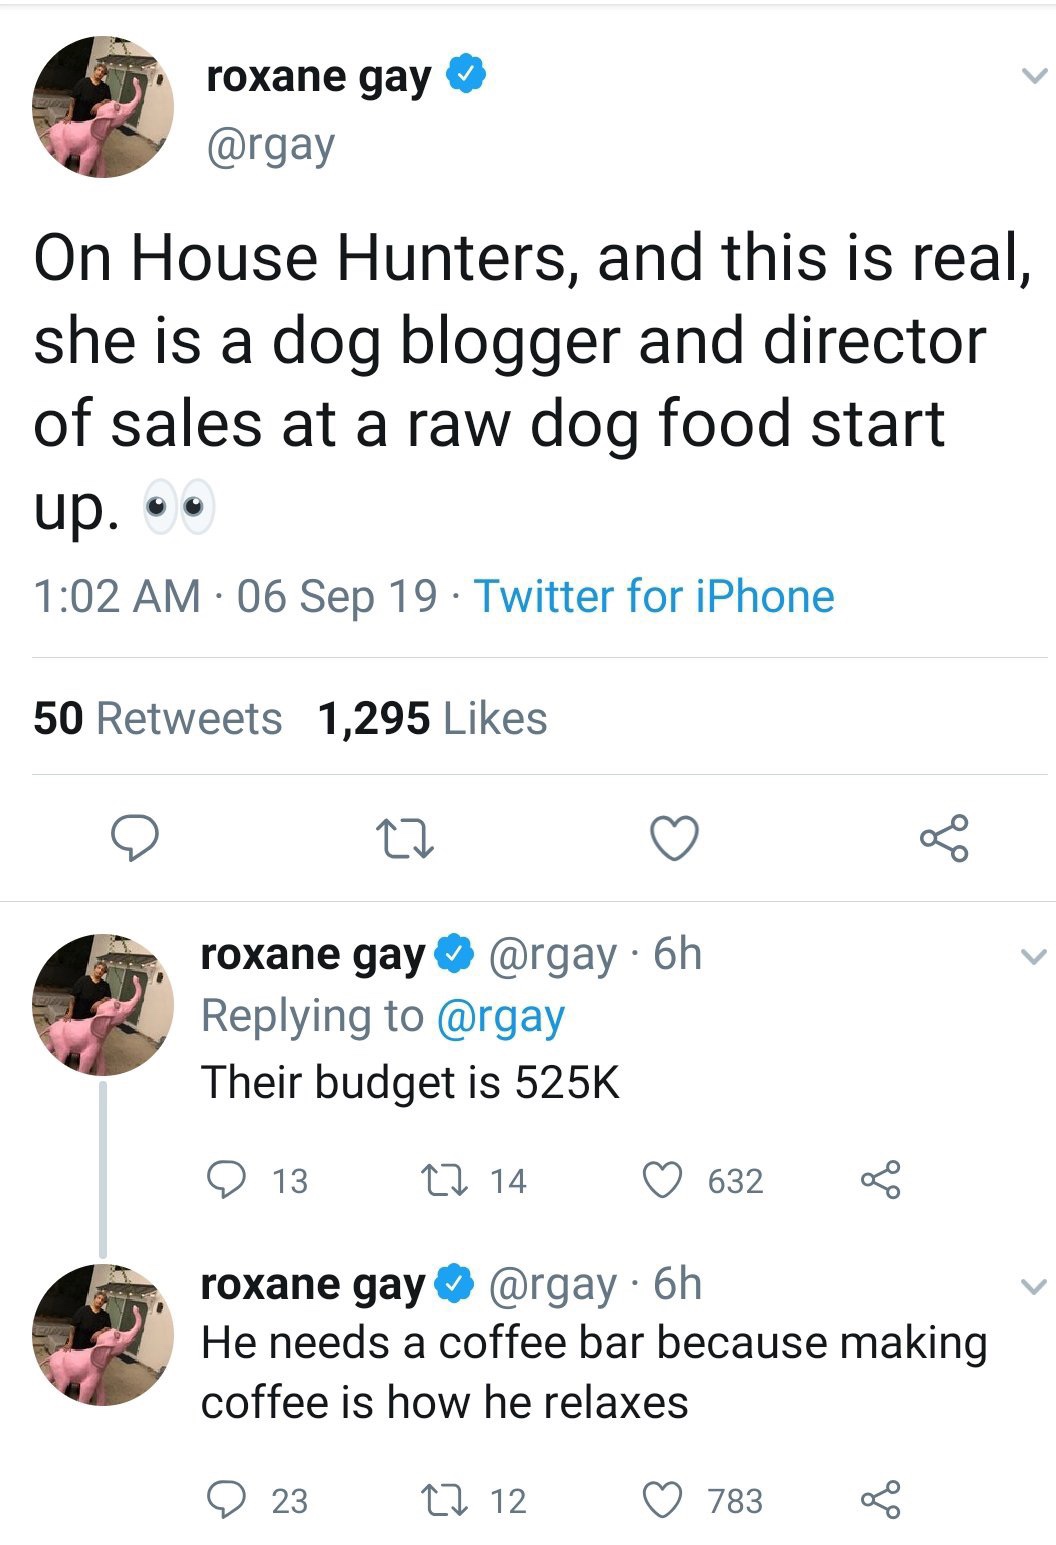 roxane gay On House Hunters, and this is real, she is a dog blogger and director of sales at a raw dog food start up.. 06 Sep 19. Twitter for iPhone 50 1,295 roxane gay 6h Their budget is 13 14 632 roxane gay 6h He needs a coffee bar because making coffee